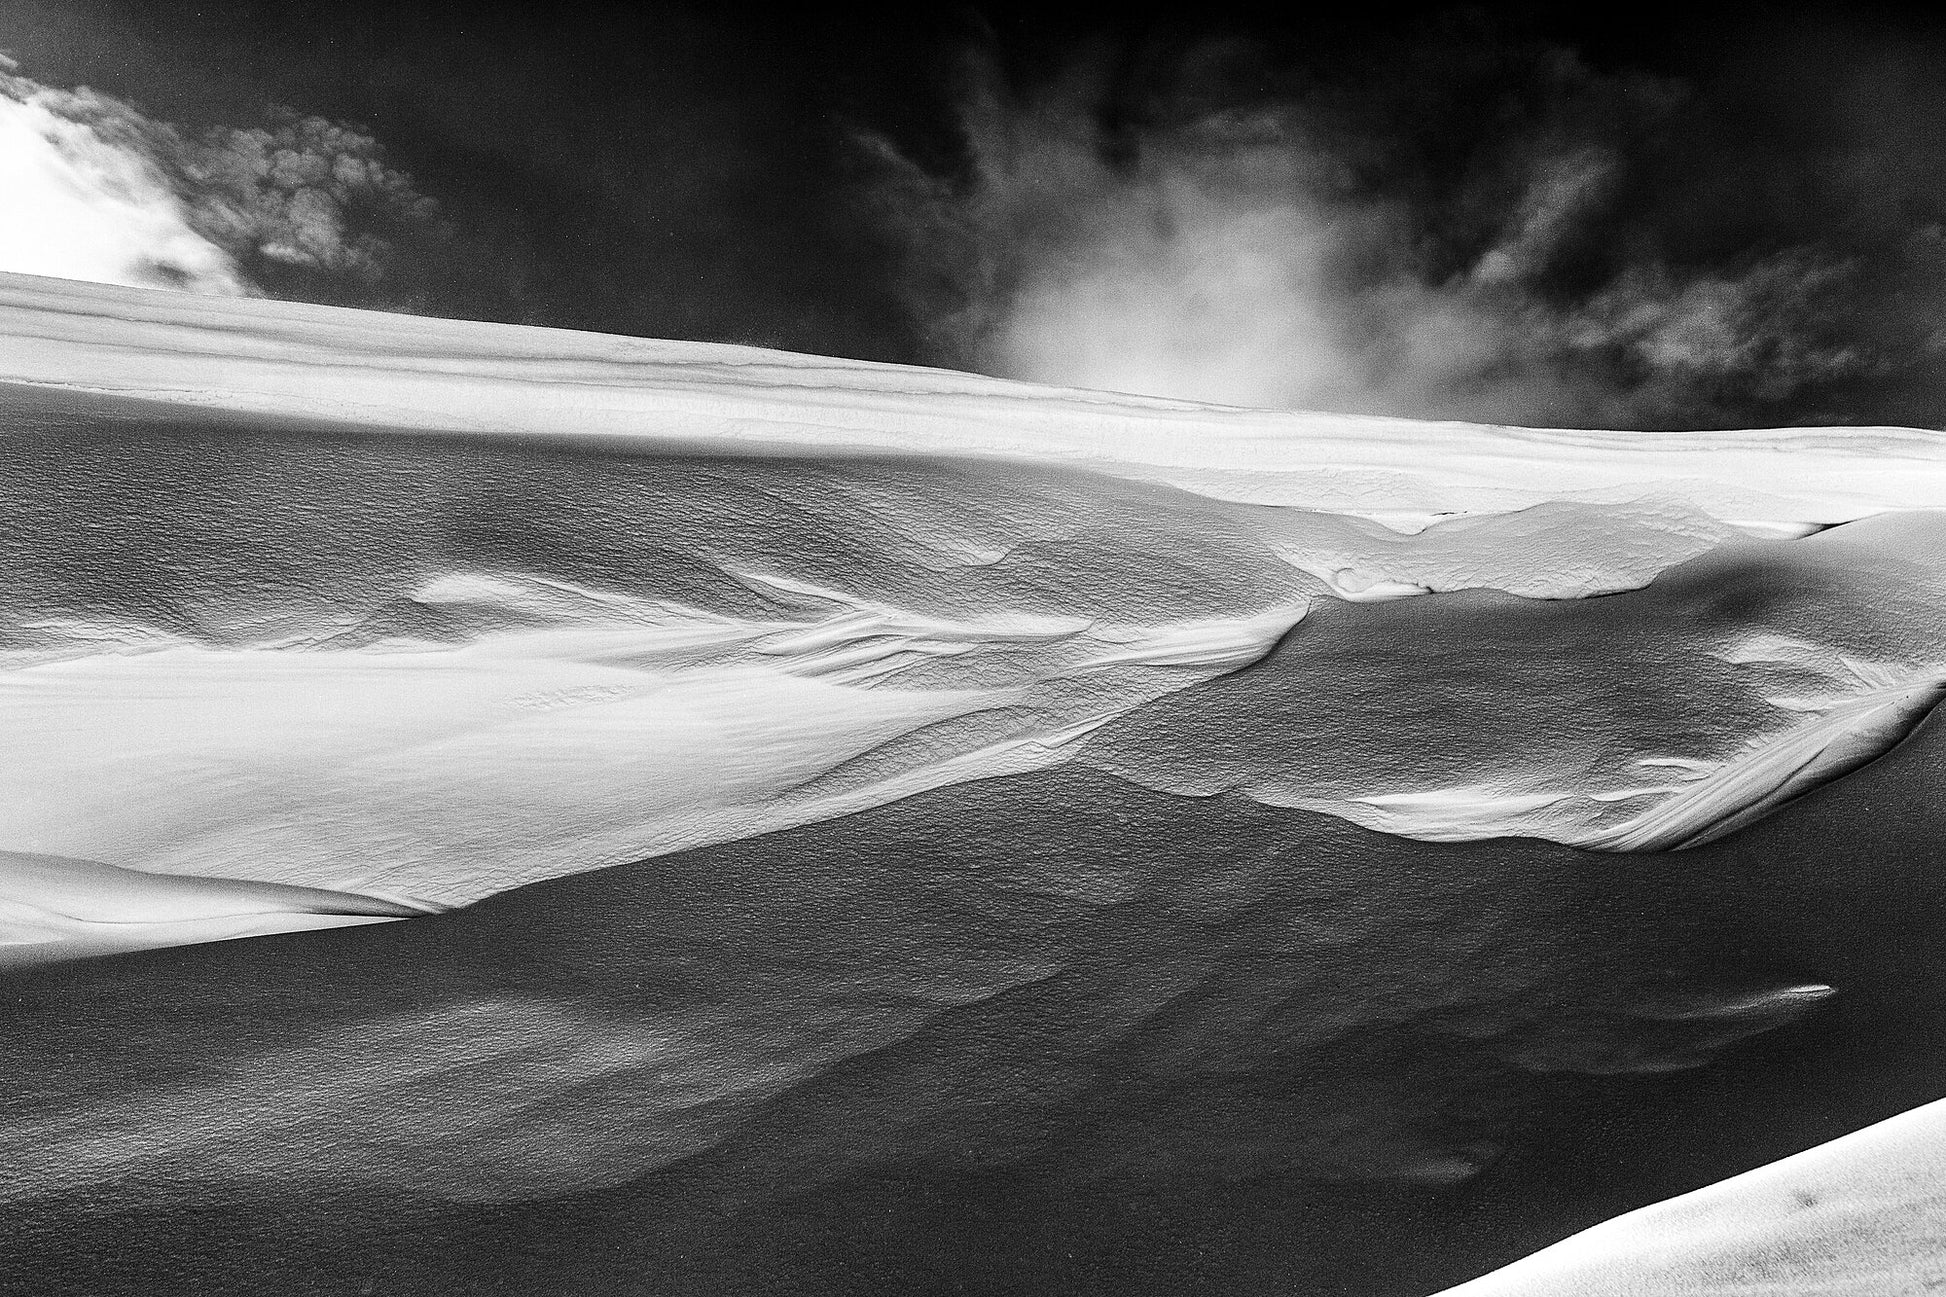 Black and white photograph capturing a detailed view of a wind-sculpted snowy ravine wall in the Arctic wilderness.